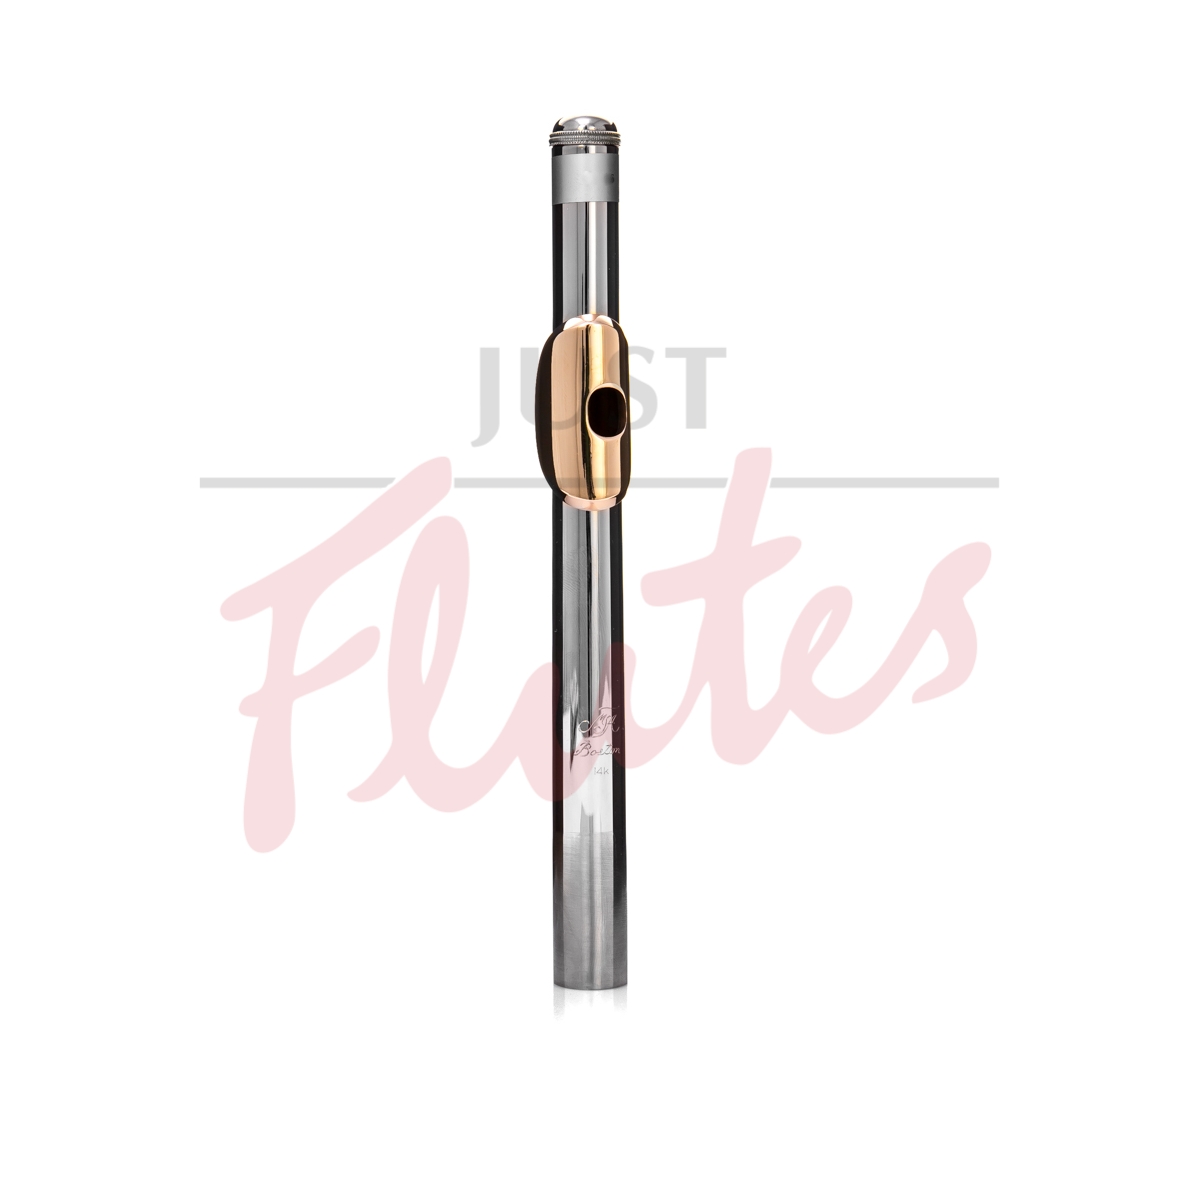 Miguel Arista Solid Flute Headjoint with 14k Rose Lip and Riser, Tally (Vintage) Style